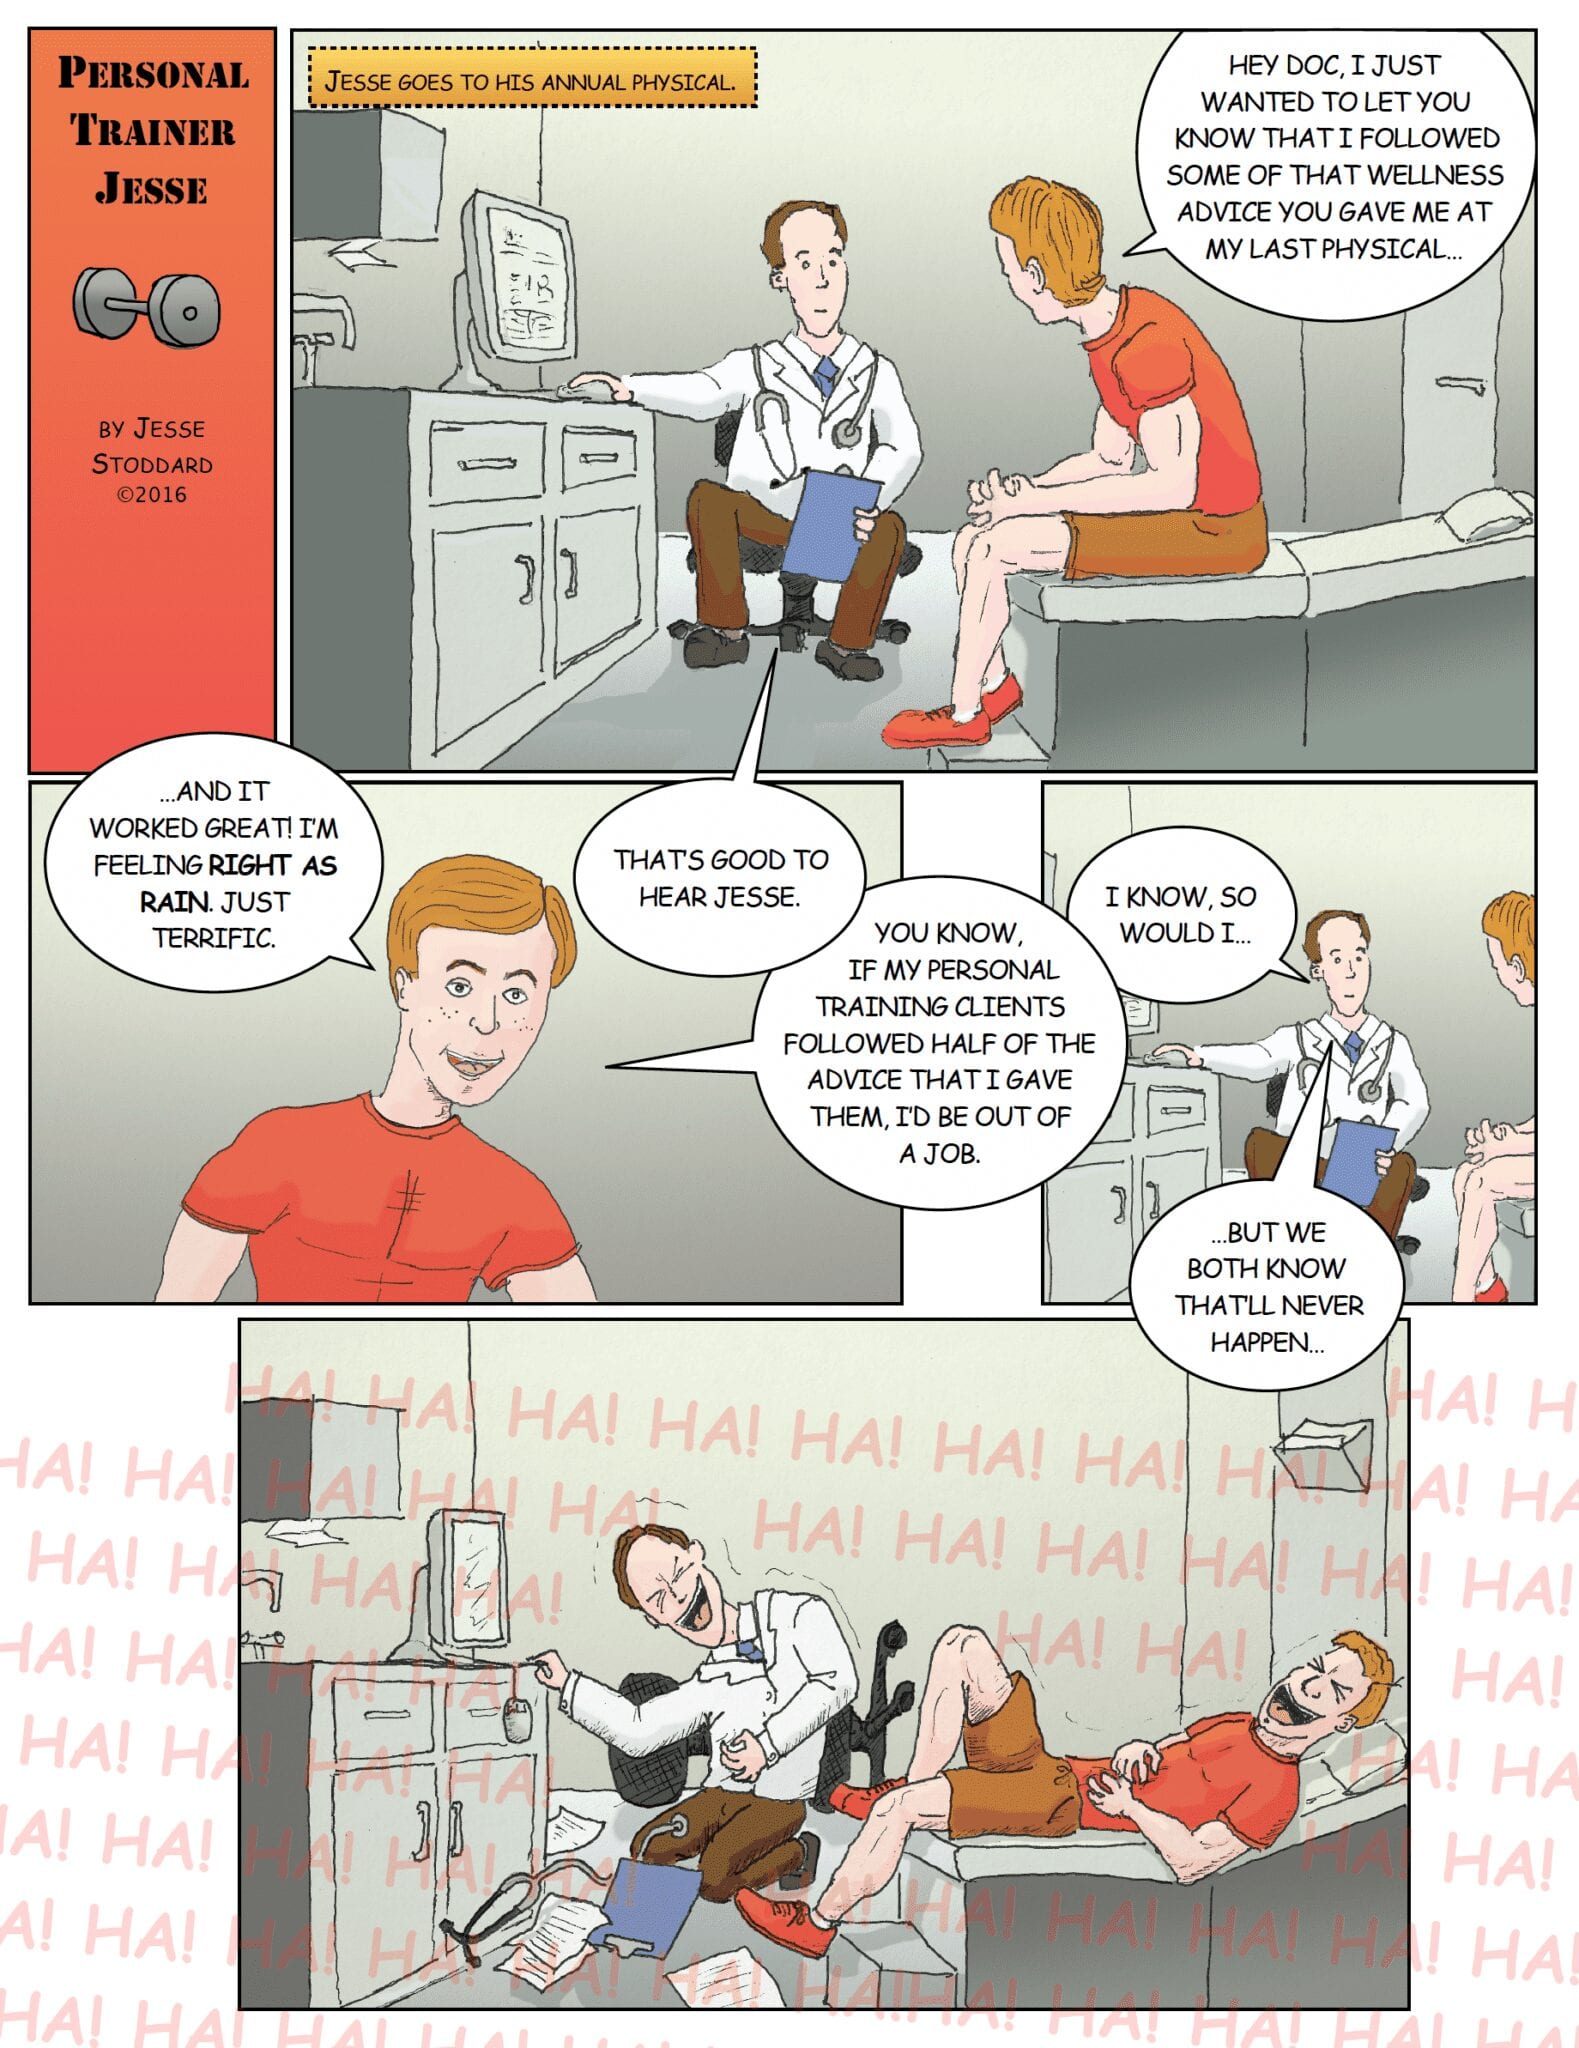 Jesse The Trainer Comic Issue 1